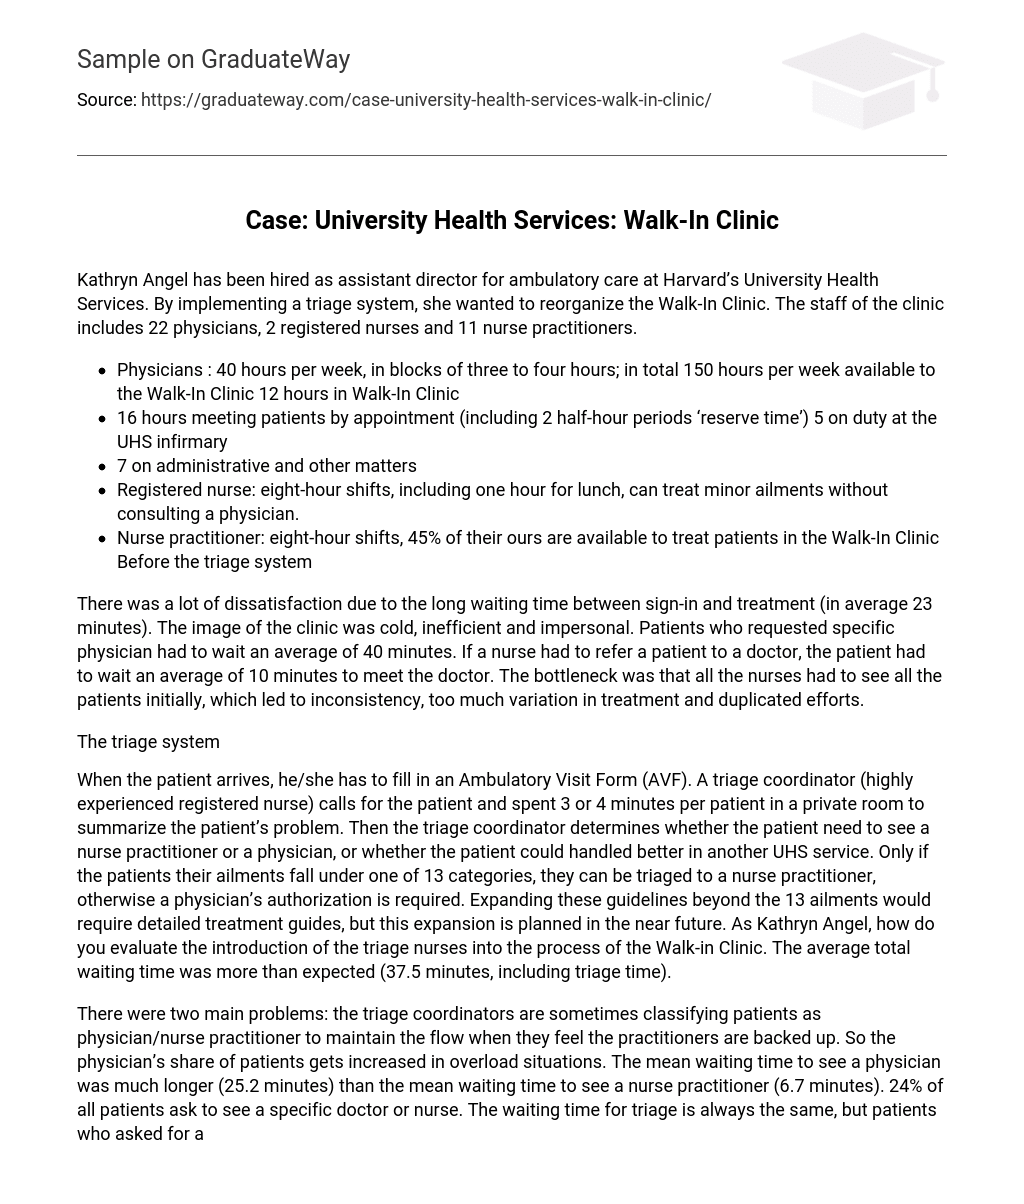 Case: University Health Services: Walk-In Clinic